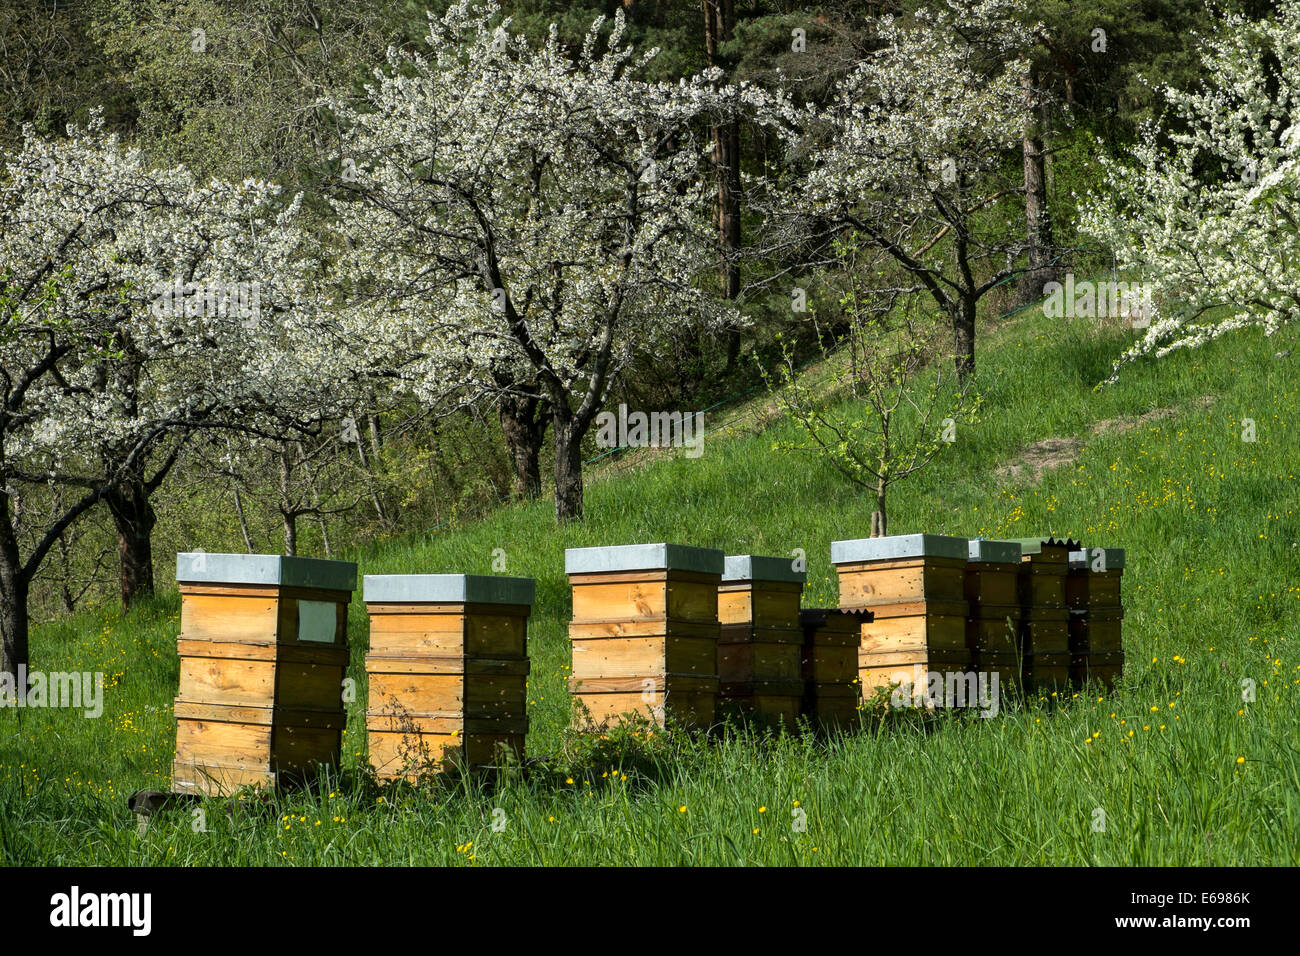 Beehives, housing for honey bees in an orchard, Überlingen, Bodenseekreis district, Baden-Württemberg, Germany Stock Photo